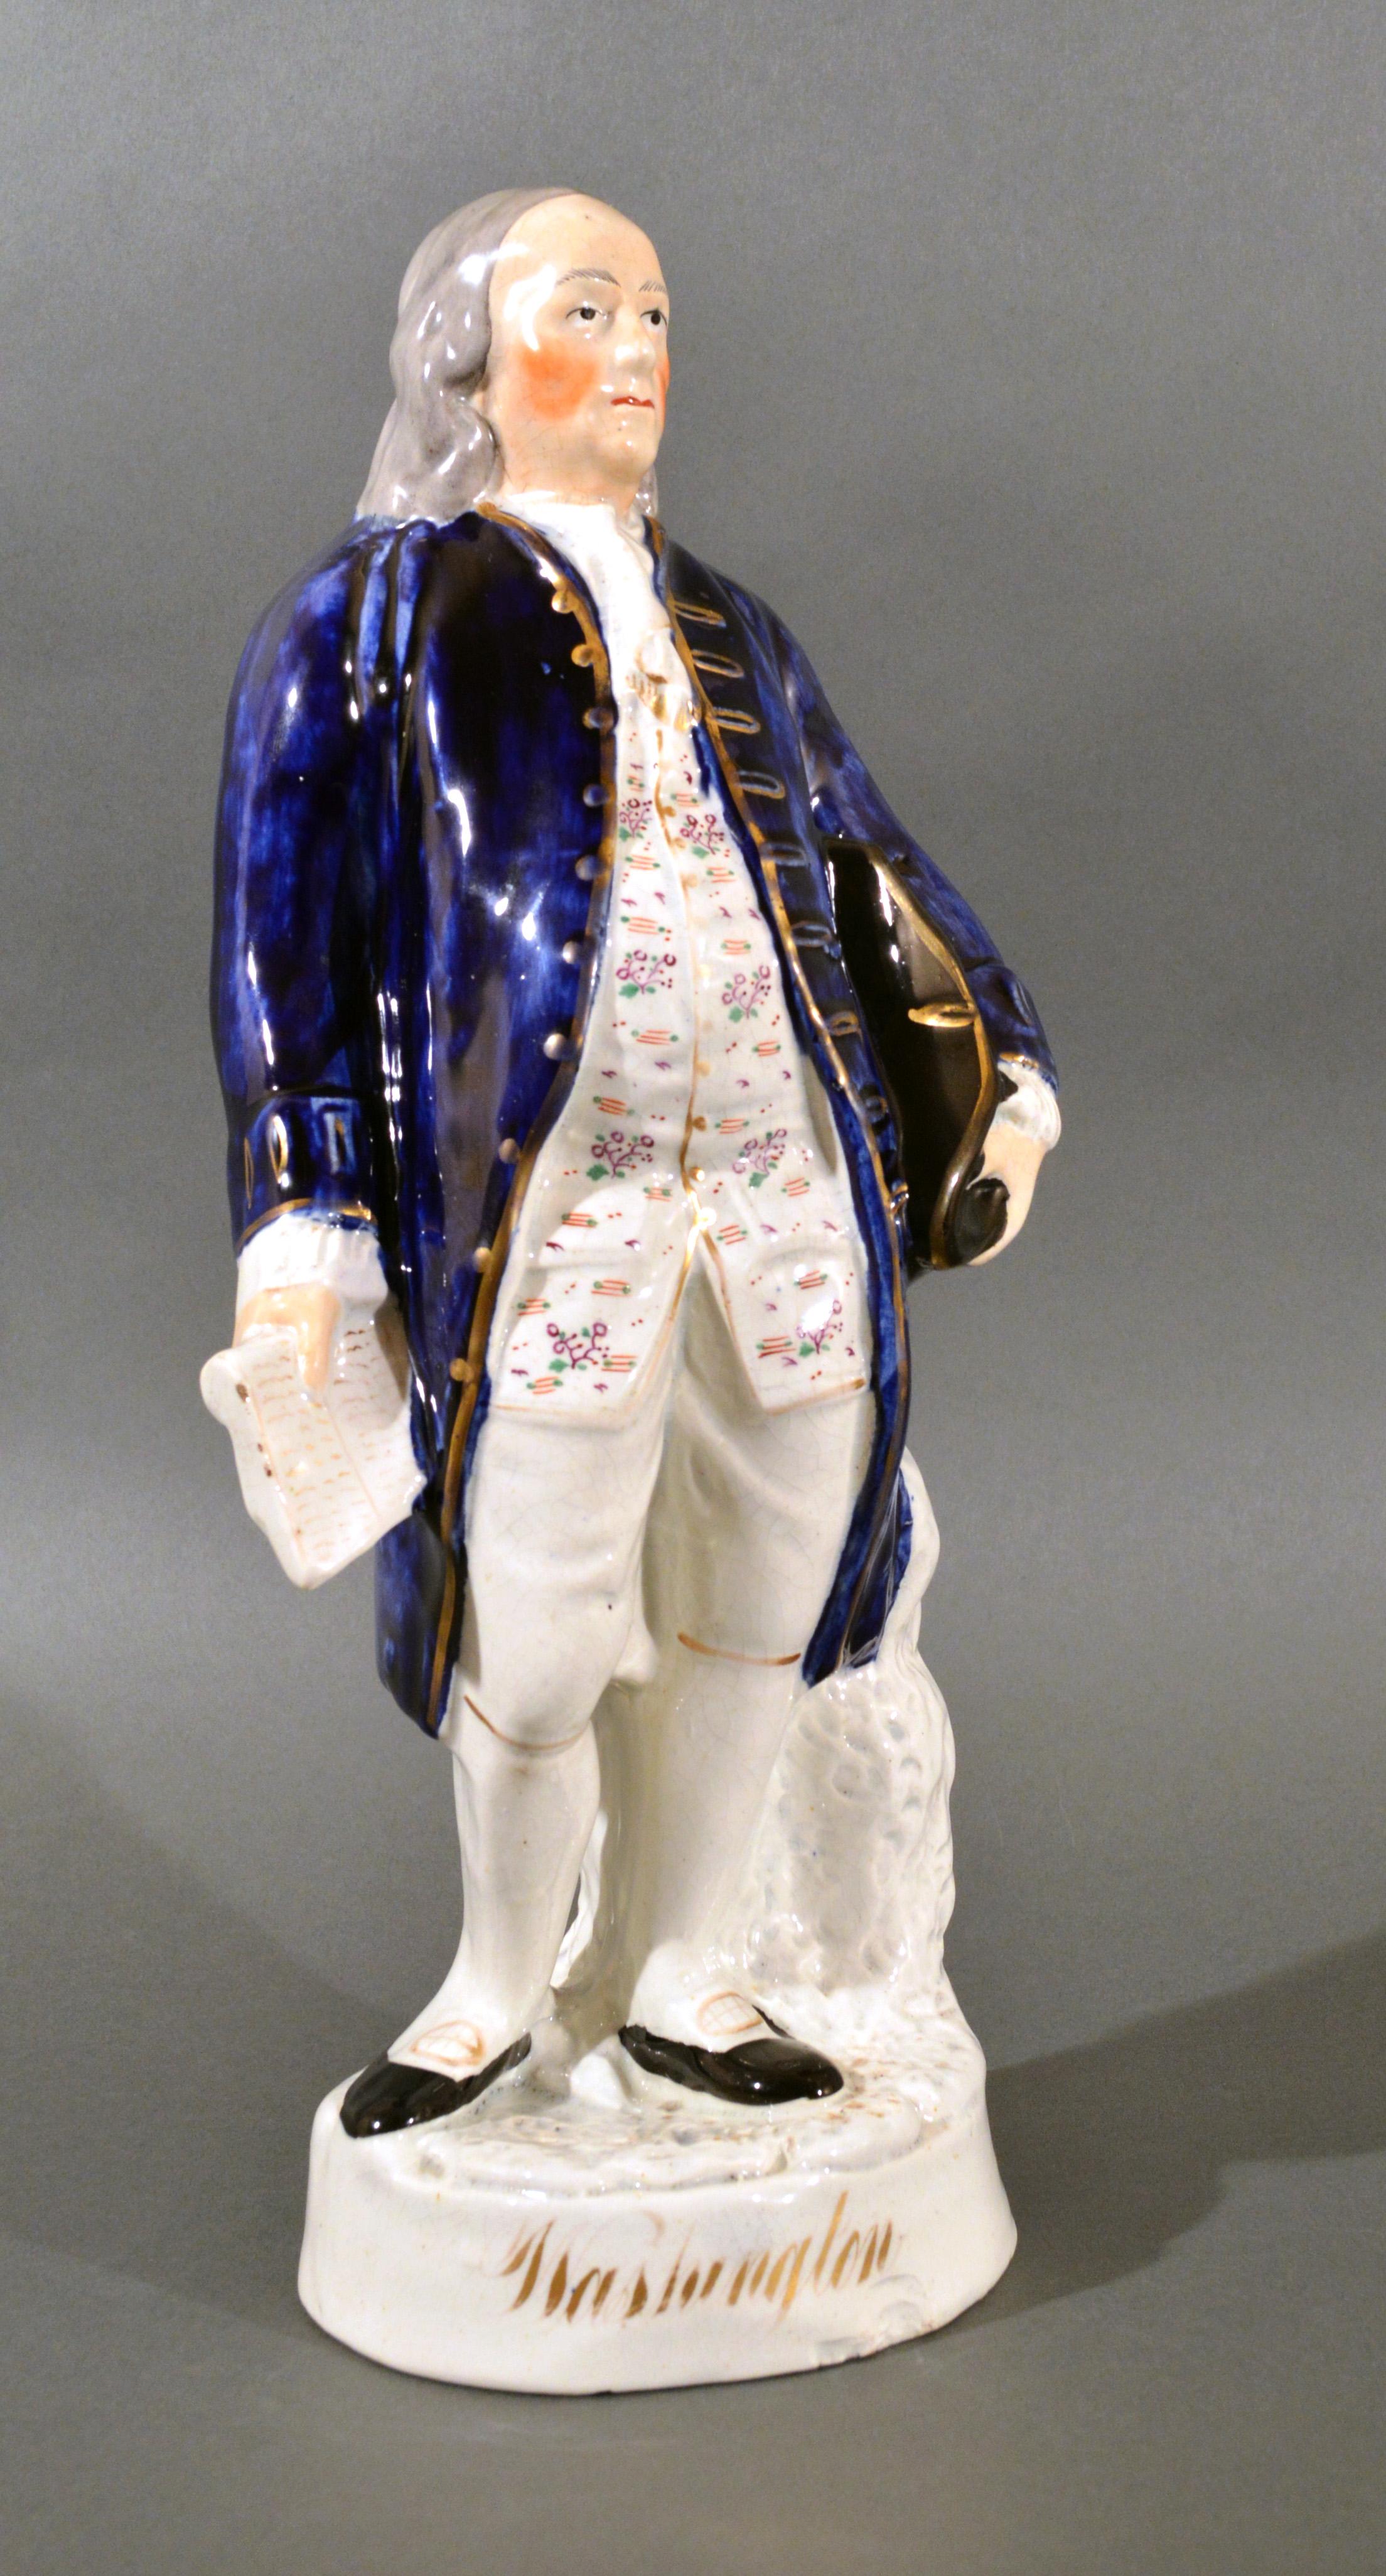 Large Staffordshire figure of Benjamin Franklin but named Washington for George Washington,
mid-19th century

The large Staffordshire pottery figure depicts an elegant standing figure with the name 